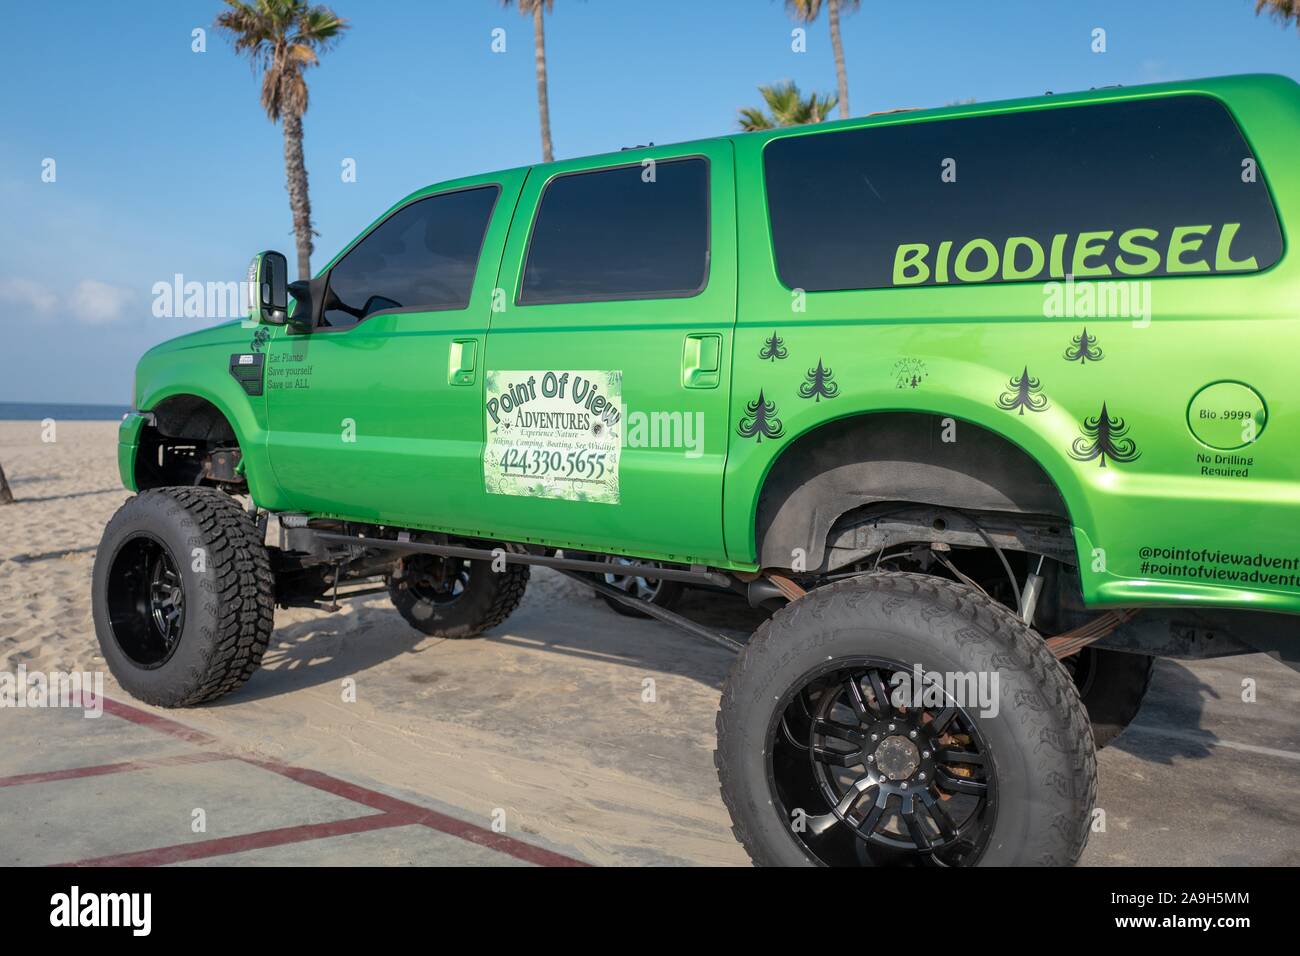 Large monster truck style vehicle in green color, with text reading Biodiesel, advertising the benefits of plant derived biodiesel fuel, Venice, Los Angeles, California, November 5, 2019. () Stock Photo